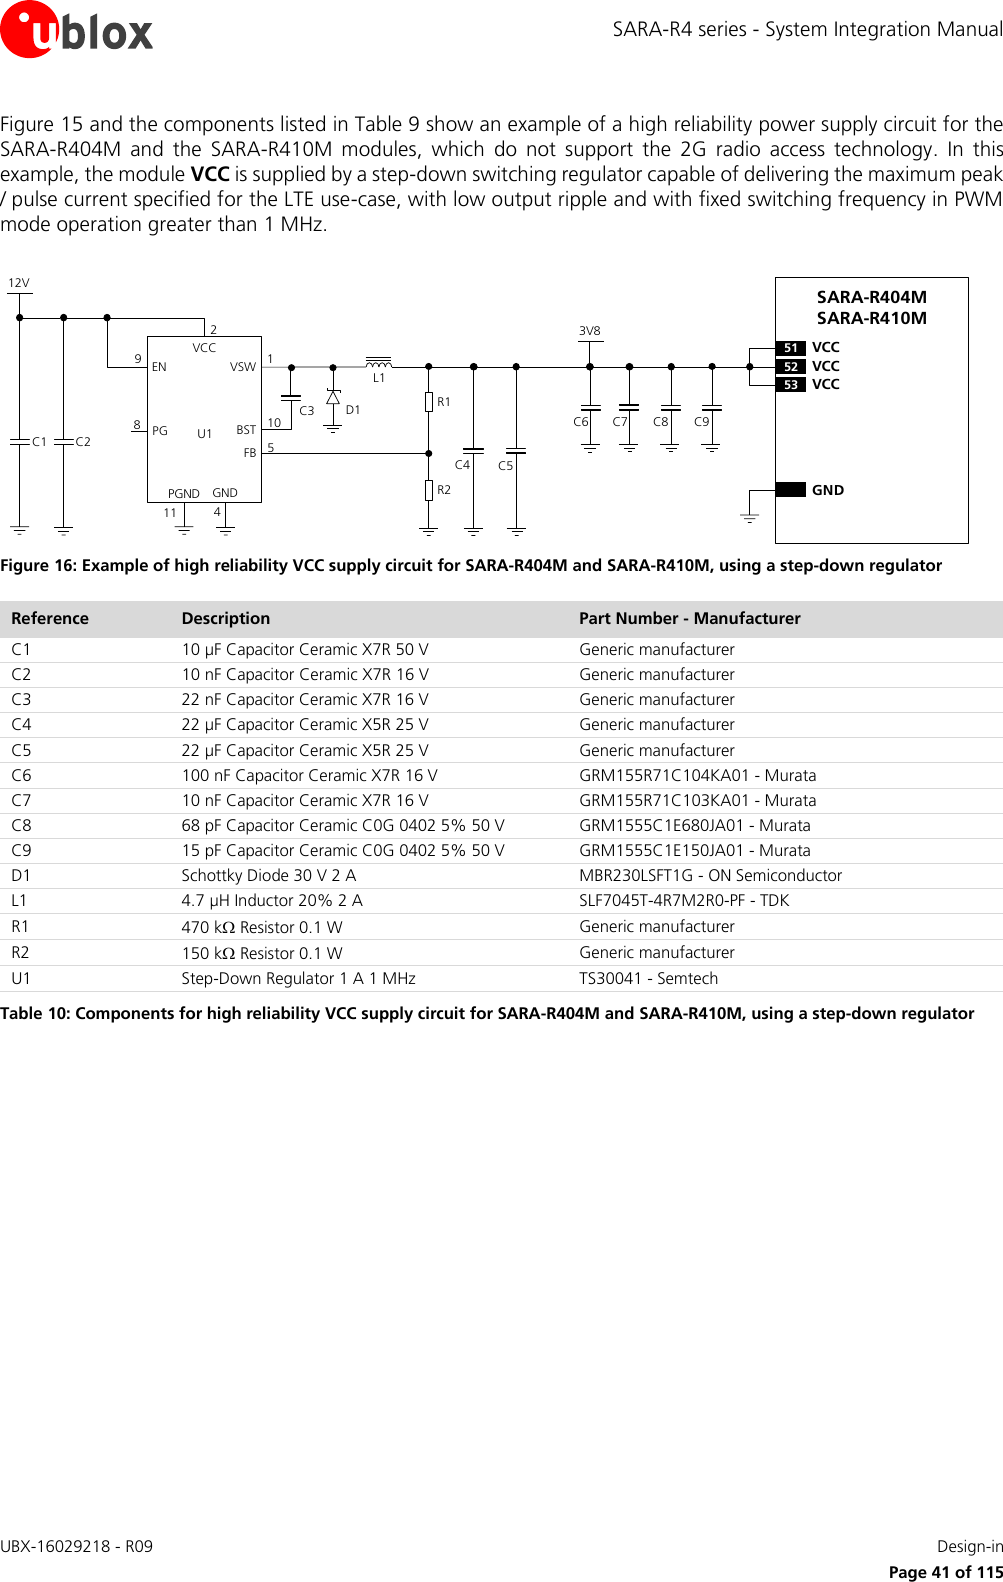 SARA-R4 series - System Integration Manual UBX-16029218 - R09    Design-in     Page 41 of 115 Figure 15 and the components listed in Table 9 show an example of a high reliability power supply circuit for the SARA-R404M  and  the  SARA-R410M  modules,  which  do  not  support  the  2G  radio  access  technology.  In  this example, the module VCC is supplied by a step-down switching regulator capable of delivering the maximum peak / pulse current specified for the LTE use-case, with low output ripple and with fixed switching frequency in PWM mode operation greater than 1 MHz.  SARA-R404MSARA-R410M12VC2C1VCCENPGVSWGND89142D1L1U1 BSTFB 5R1R252 VCC53 VCC51 VCCGND3V8C6 C7 C8PGNDC4C3C51110 C9 Figure 16: Example of high reliability VCC supply circuit for SARA-R404M and SARA-R410M, using a step-down regulator Reference Description Part Number - Manufacturer C1 10 µF Capacitor Ceramic X7R 50 V Generic manufacturer C2 10 nF Capacitor Ceramic X7R 16 V Generic manufacturer C3 22 nF Capacitor Ceramic X7R 16 V Generic manufacturer C4 22 µF Capacitor Ceramic X5R 25 V Generic manufacturer C5 22 µF Capacitor Ceramic X5R 25 V Generic manufacturer C6 100 nF Capacitor Ceramic X7R 16 V GRM155R71C104KA01 - Murata C7 10 nF Capacitor Ceramic X7R 16 V GRM155R71C103KA01 - Murata C8 68 pF Capacitor Ceramic C0G 0402 5% 50 V GRM1555C1E680JA01 - Murata C9 15 pF Capacitor Ceramic C0G 0402 5% 50 V GRM1555C1E150JA01 - Murata D1 Schottky Diode 30 V 2 A MBR230LSFT1G - ON Semiconductor L1 4.7 µH Inductor 20% 2 A SLF7045T-4R7M2R0-PF - TDK R1 470 k Resistor 0.1 W Generic manufacturer R2 150 k Resistor 0.1 W Generic manufacturer U1 Step-Down Regulator 1 A 1 MHz TS30041 - Semtech Table 10: Components for high reliability VCC supply circuit for SARA-R404M and SARA-R410M, using a step-down regulator   